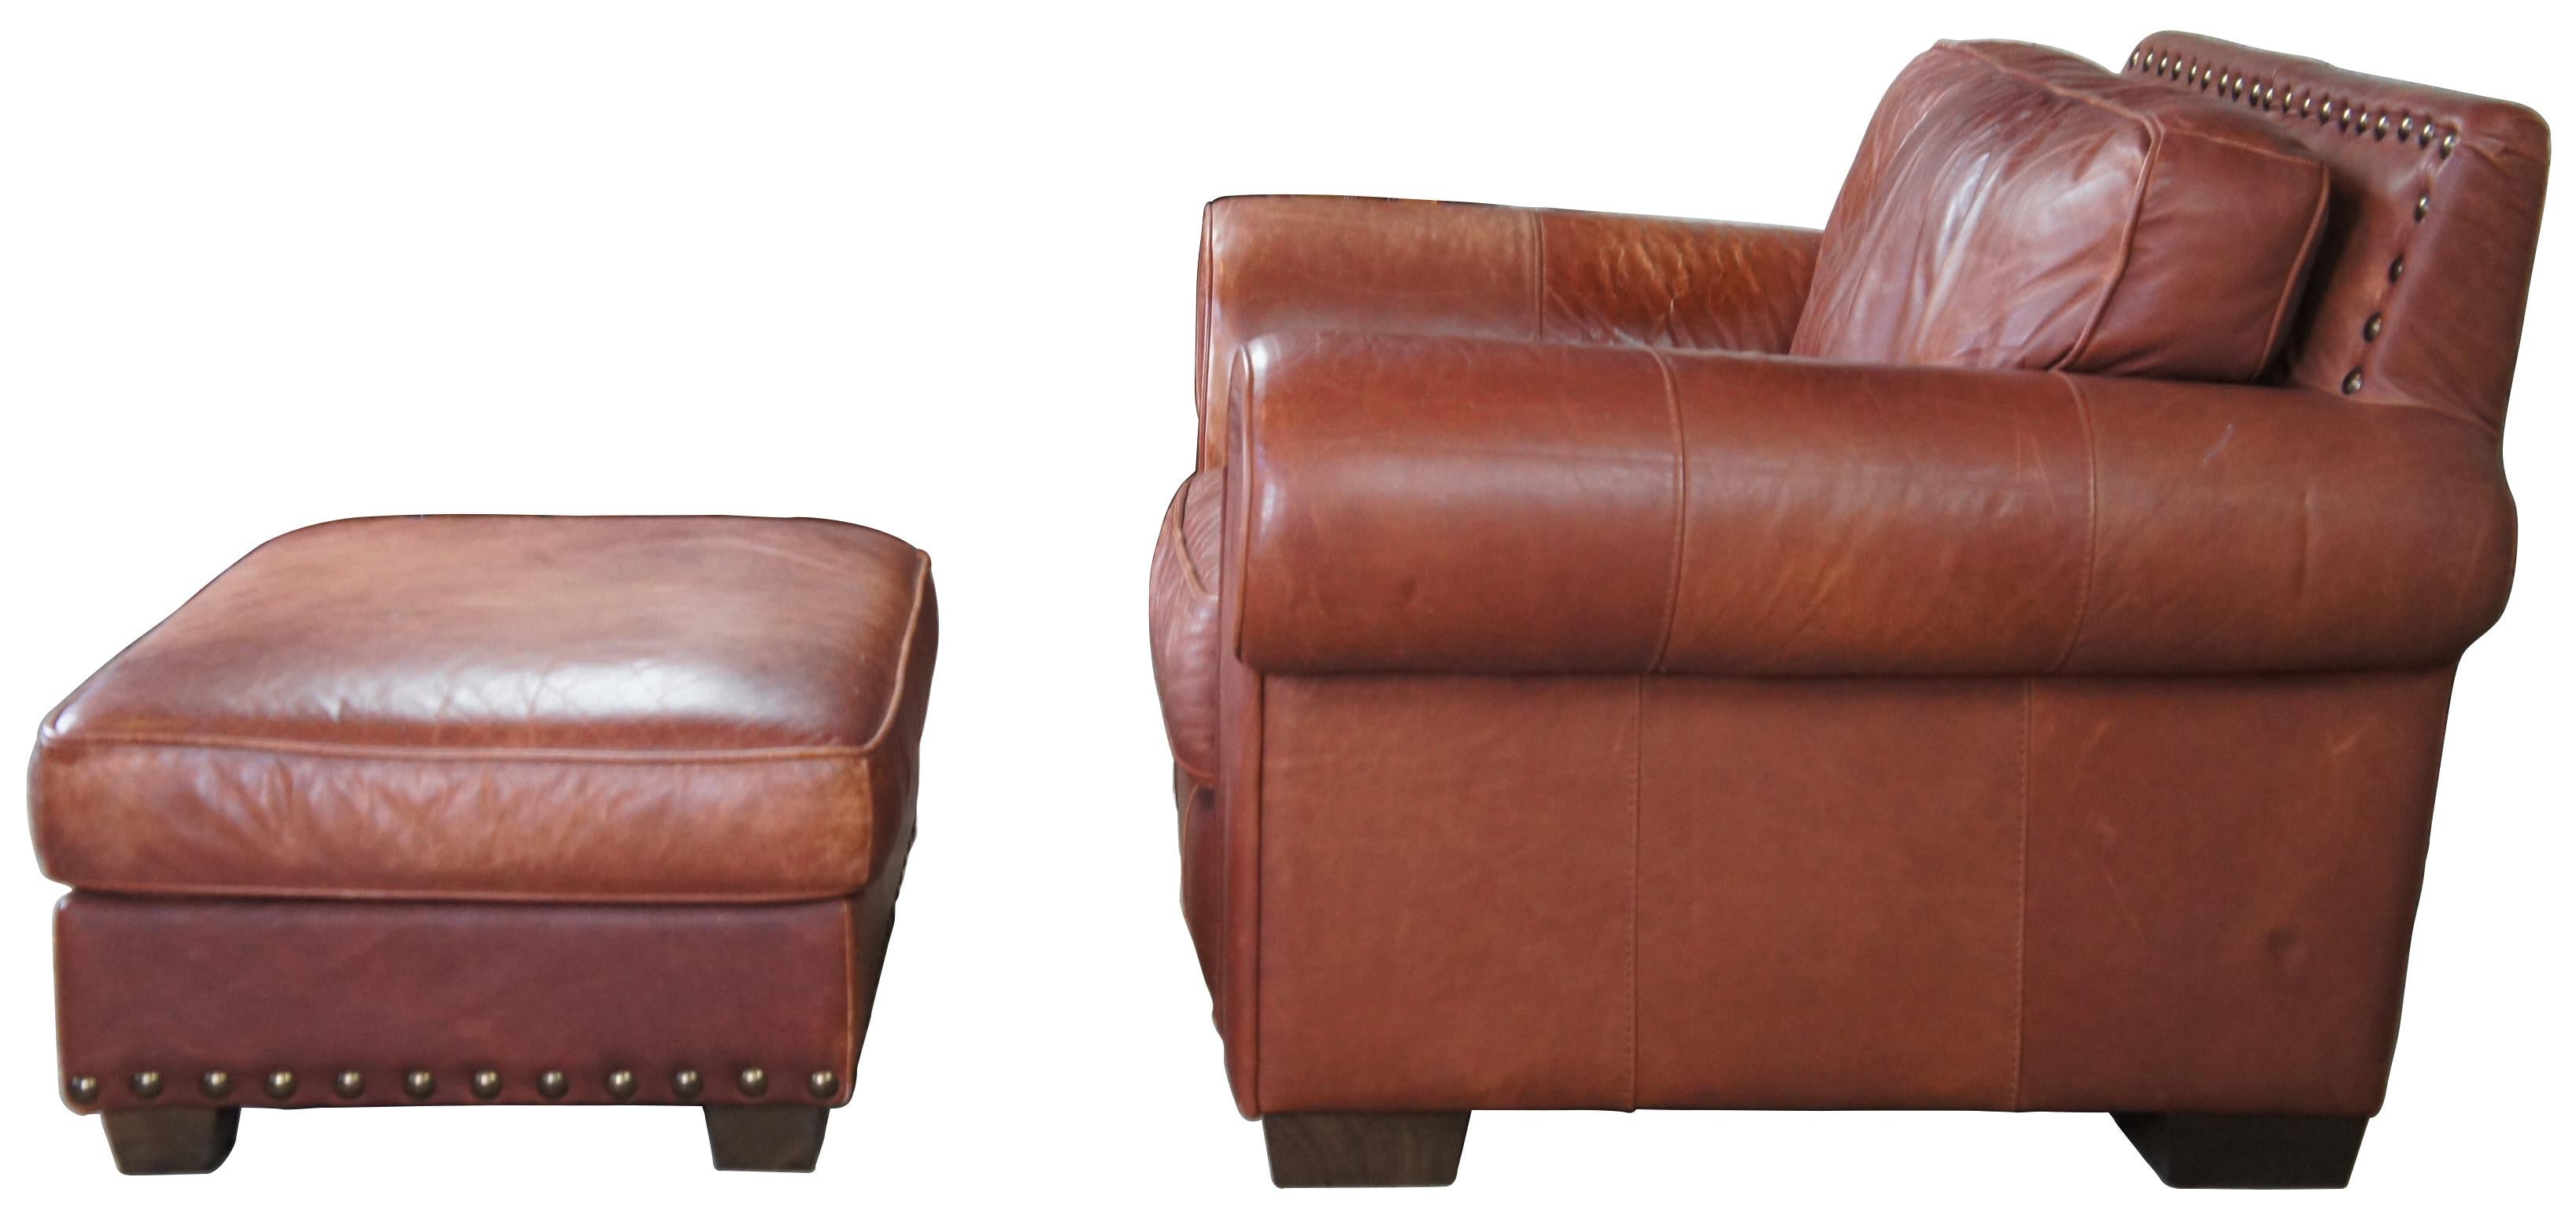 cognac leather chair and ottoman